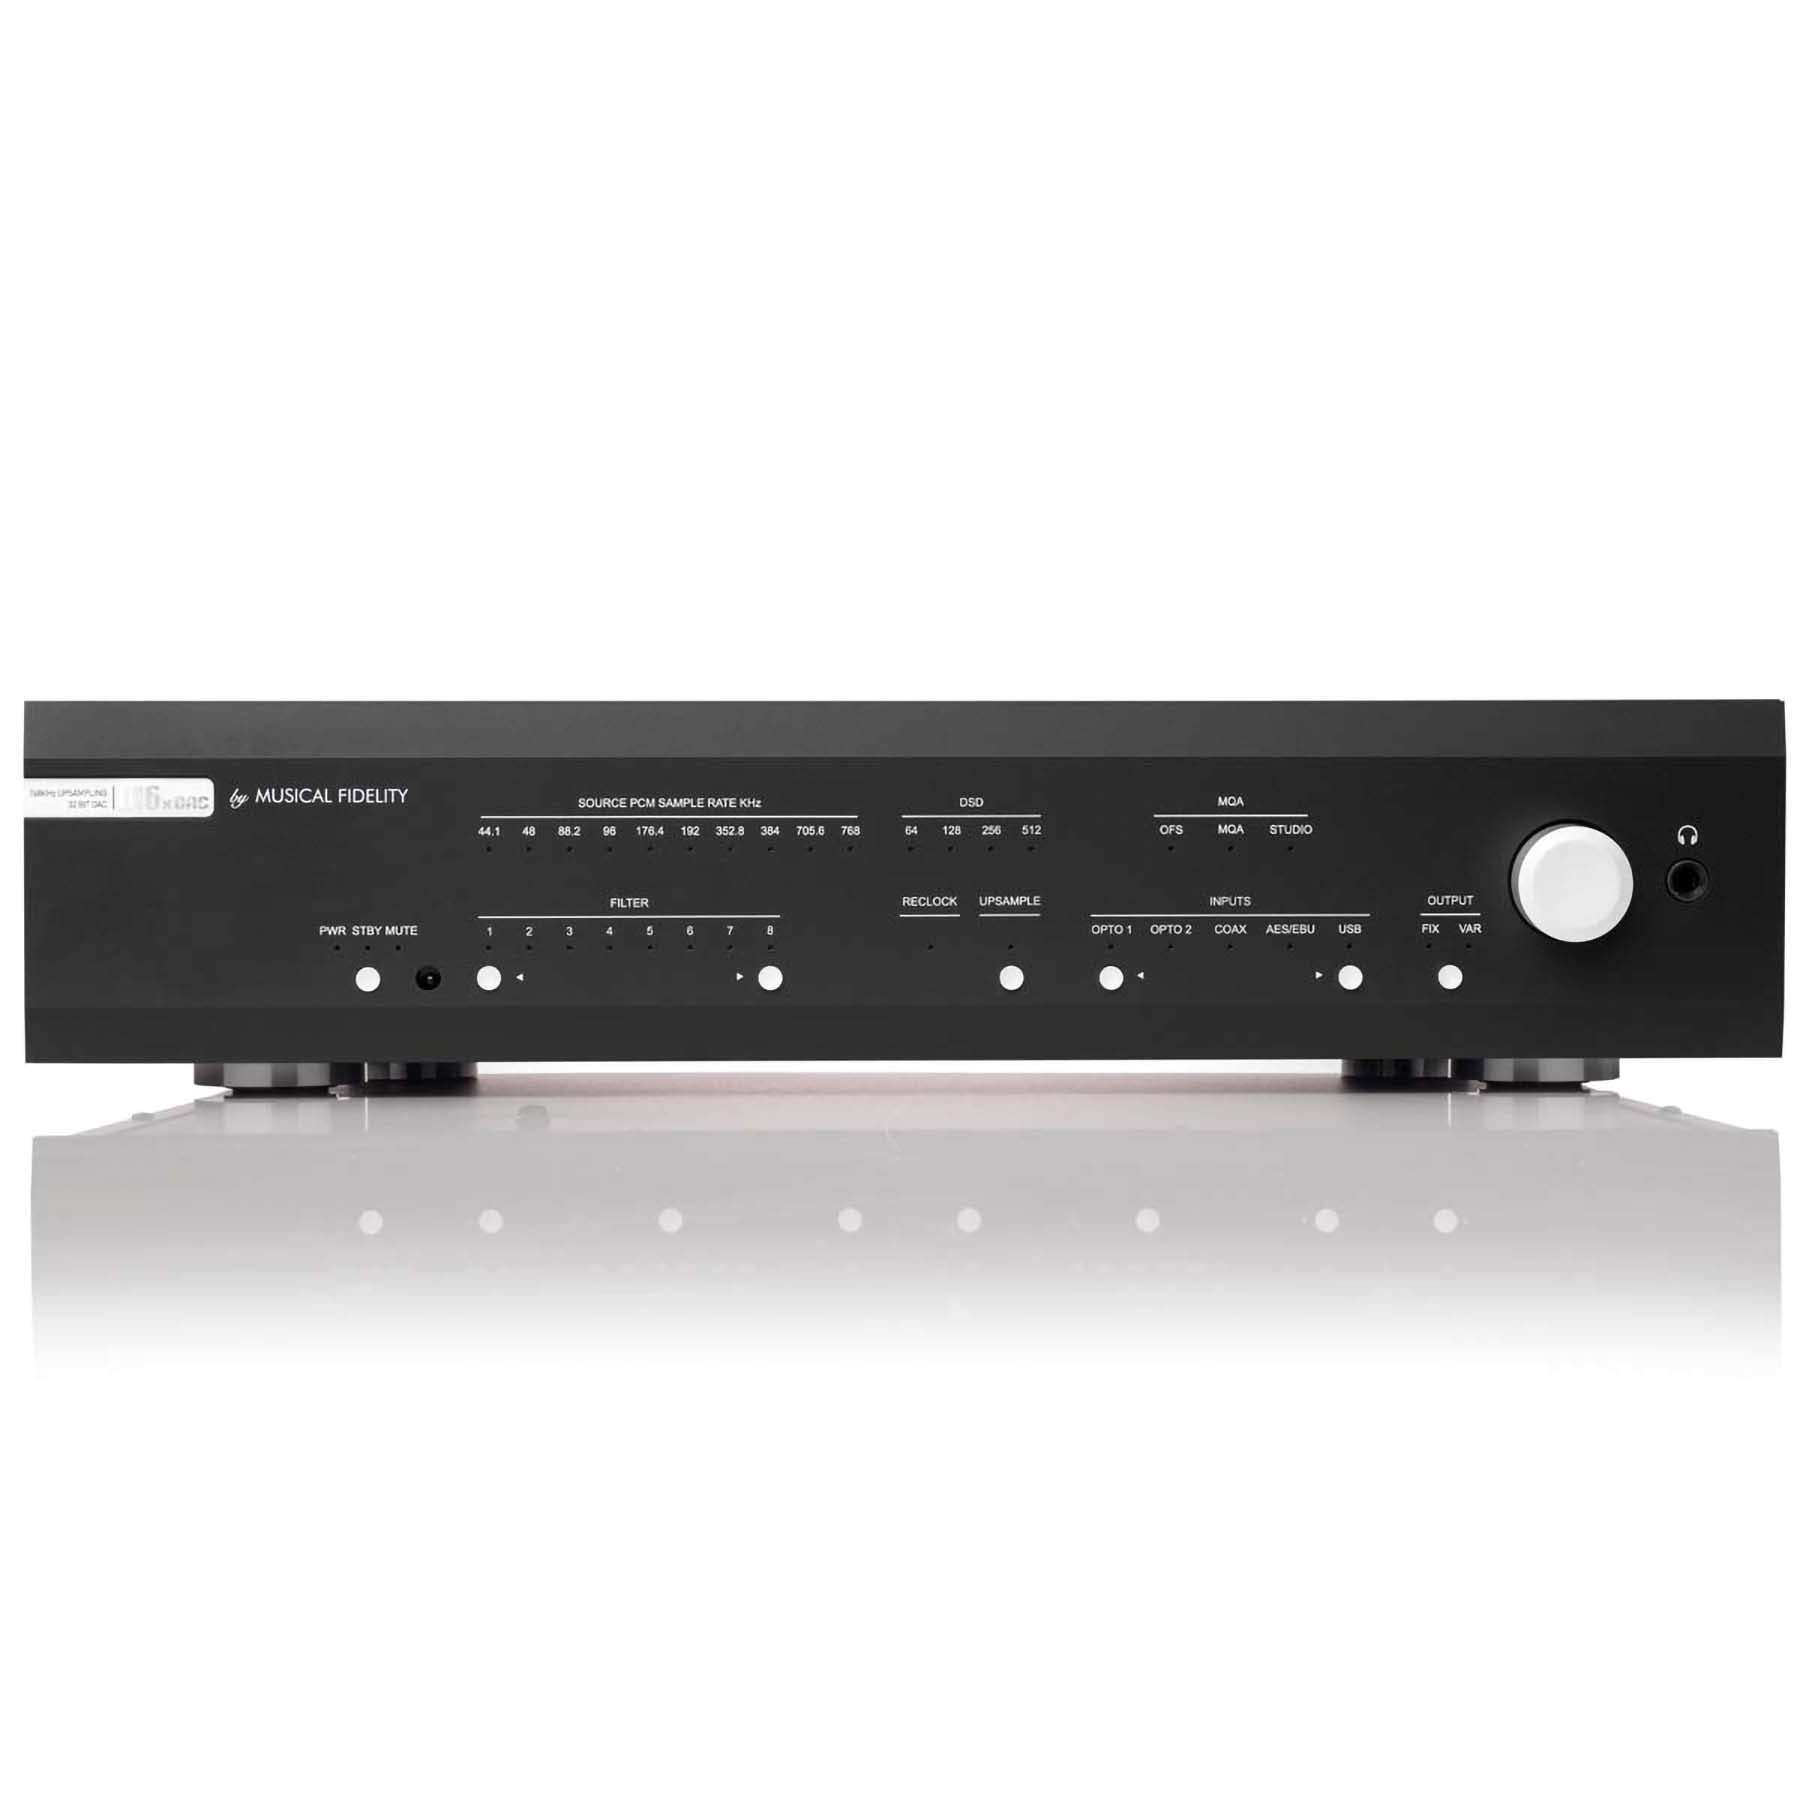 Musical Fidelity M6x DAC - Digital to Analogue Converter